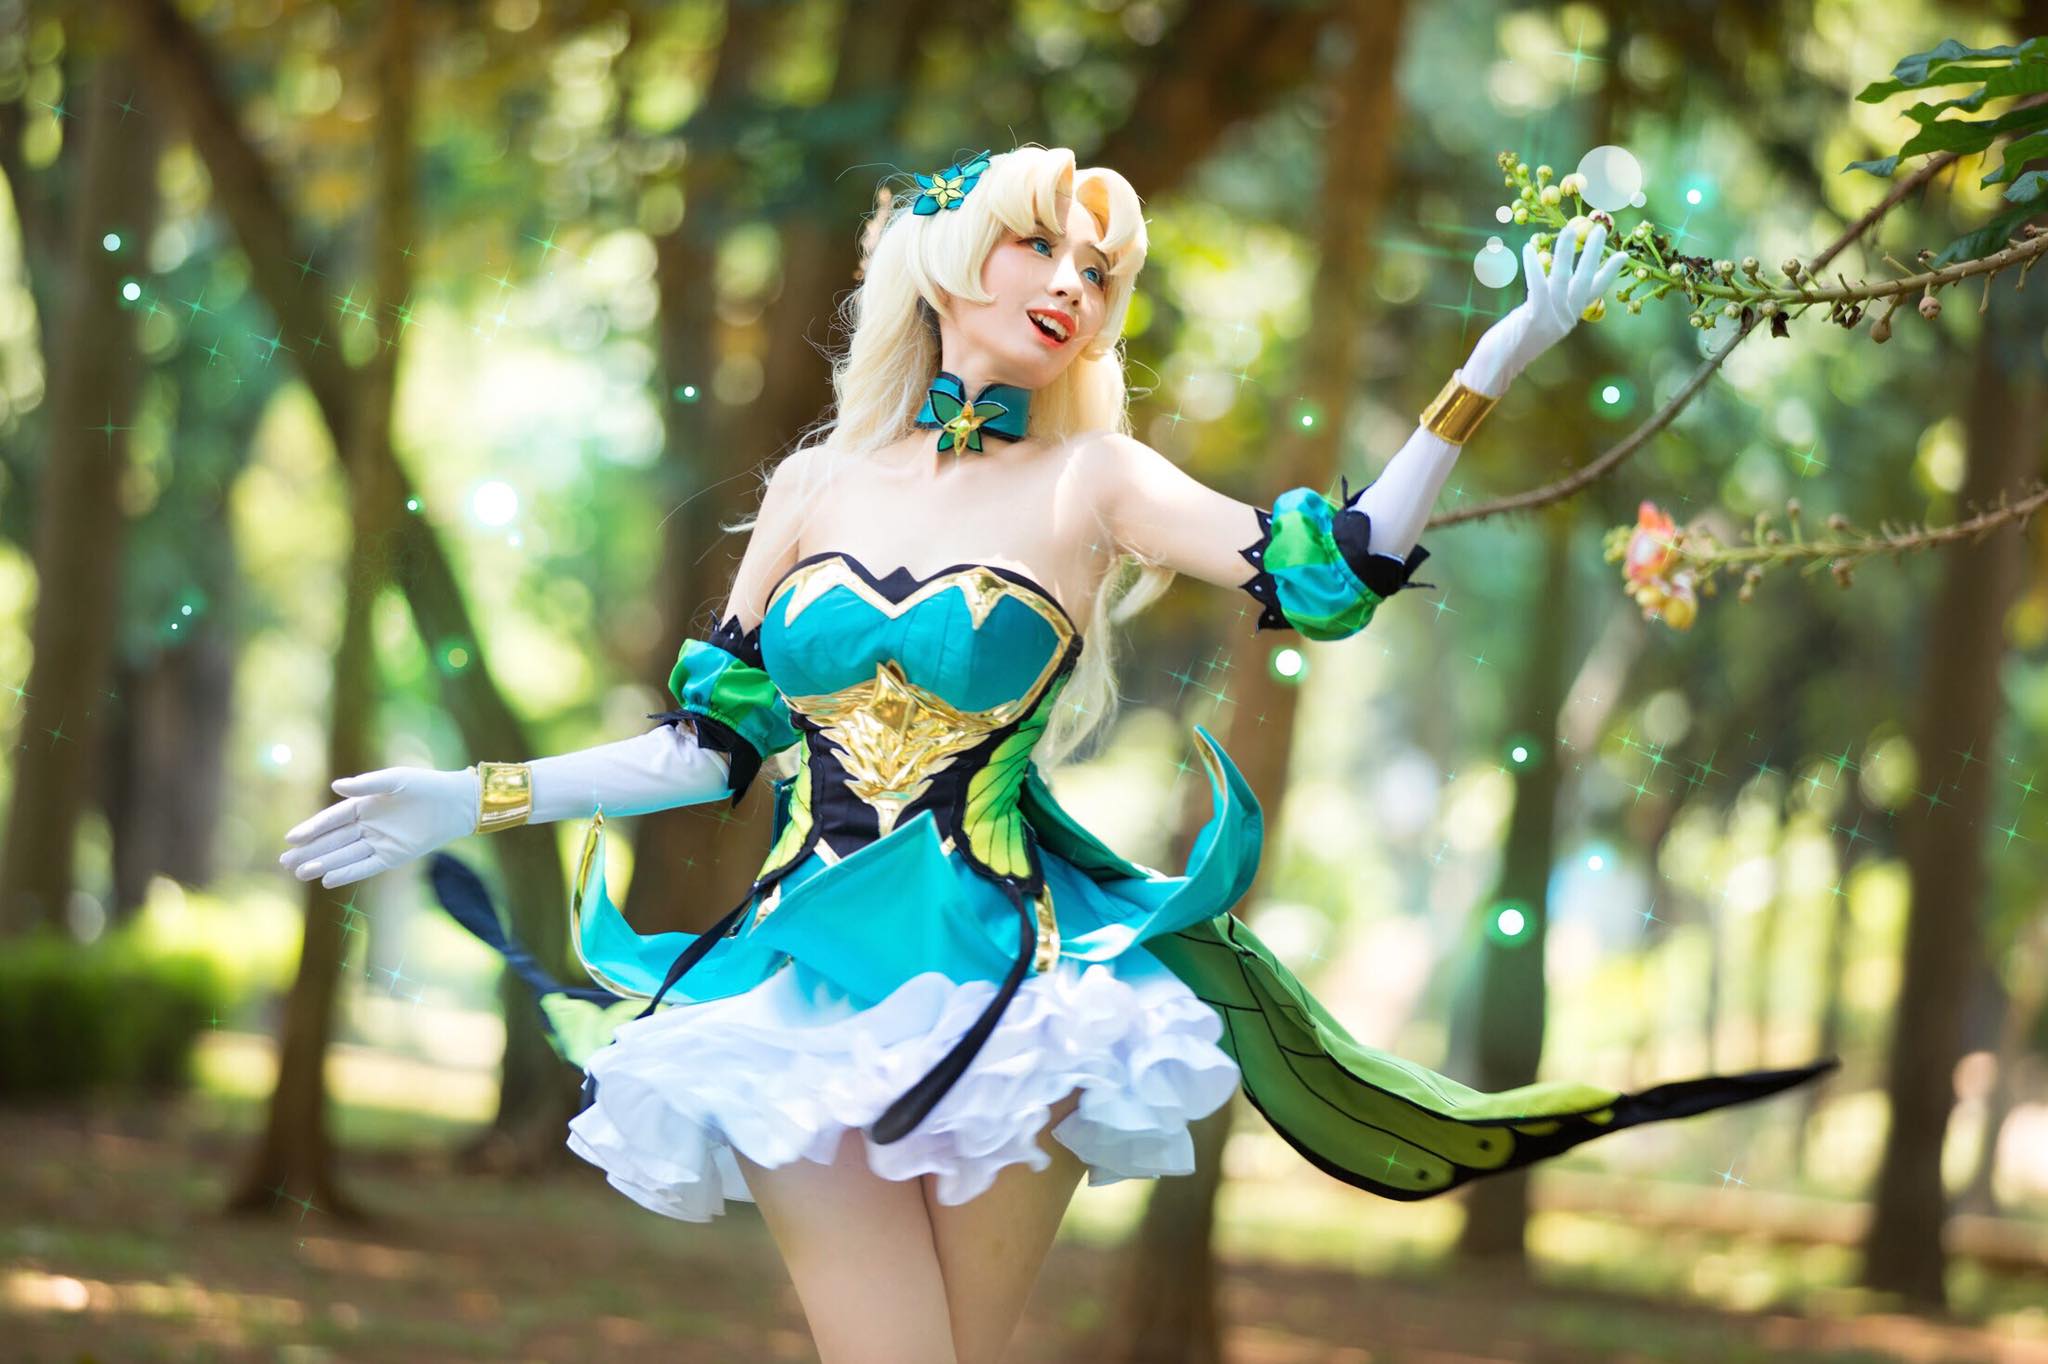 11 cosplay mobile legend